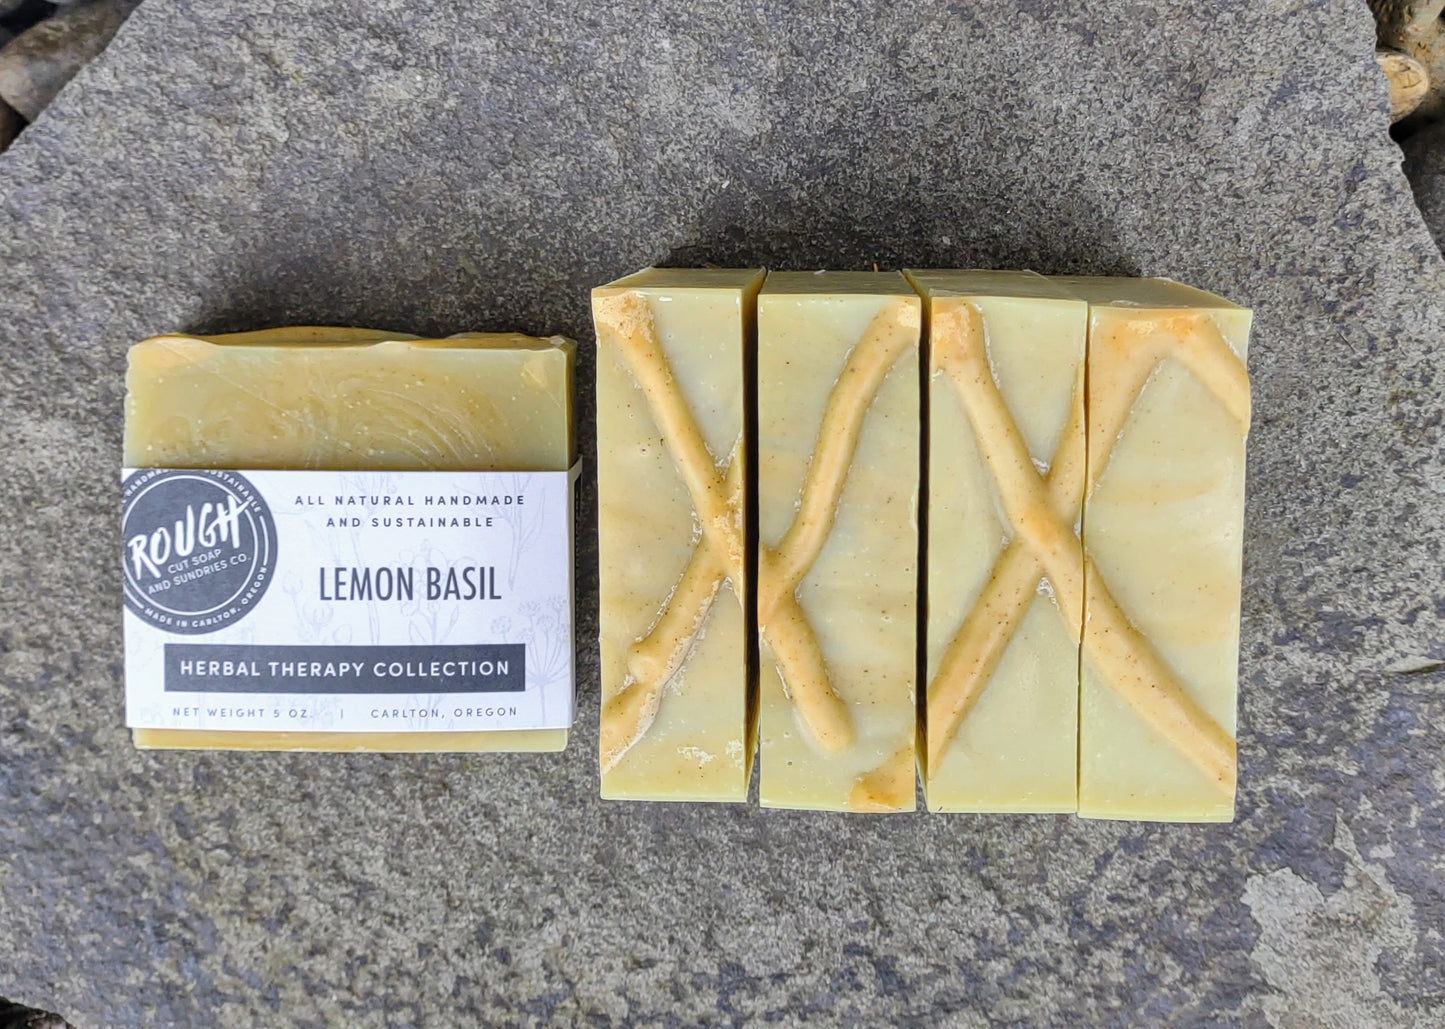 Lemon Basil - Herbal Therapy Collection Handcrafted Artisan Rough Cut Soap